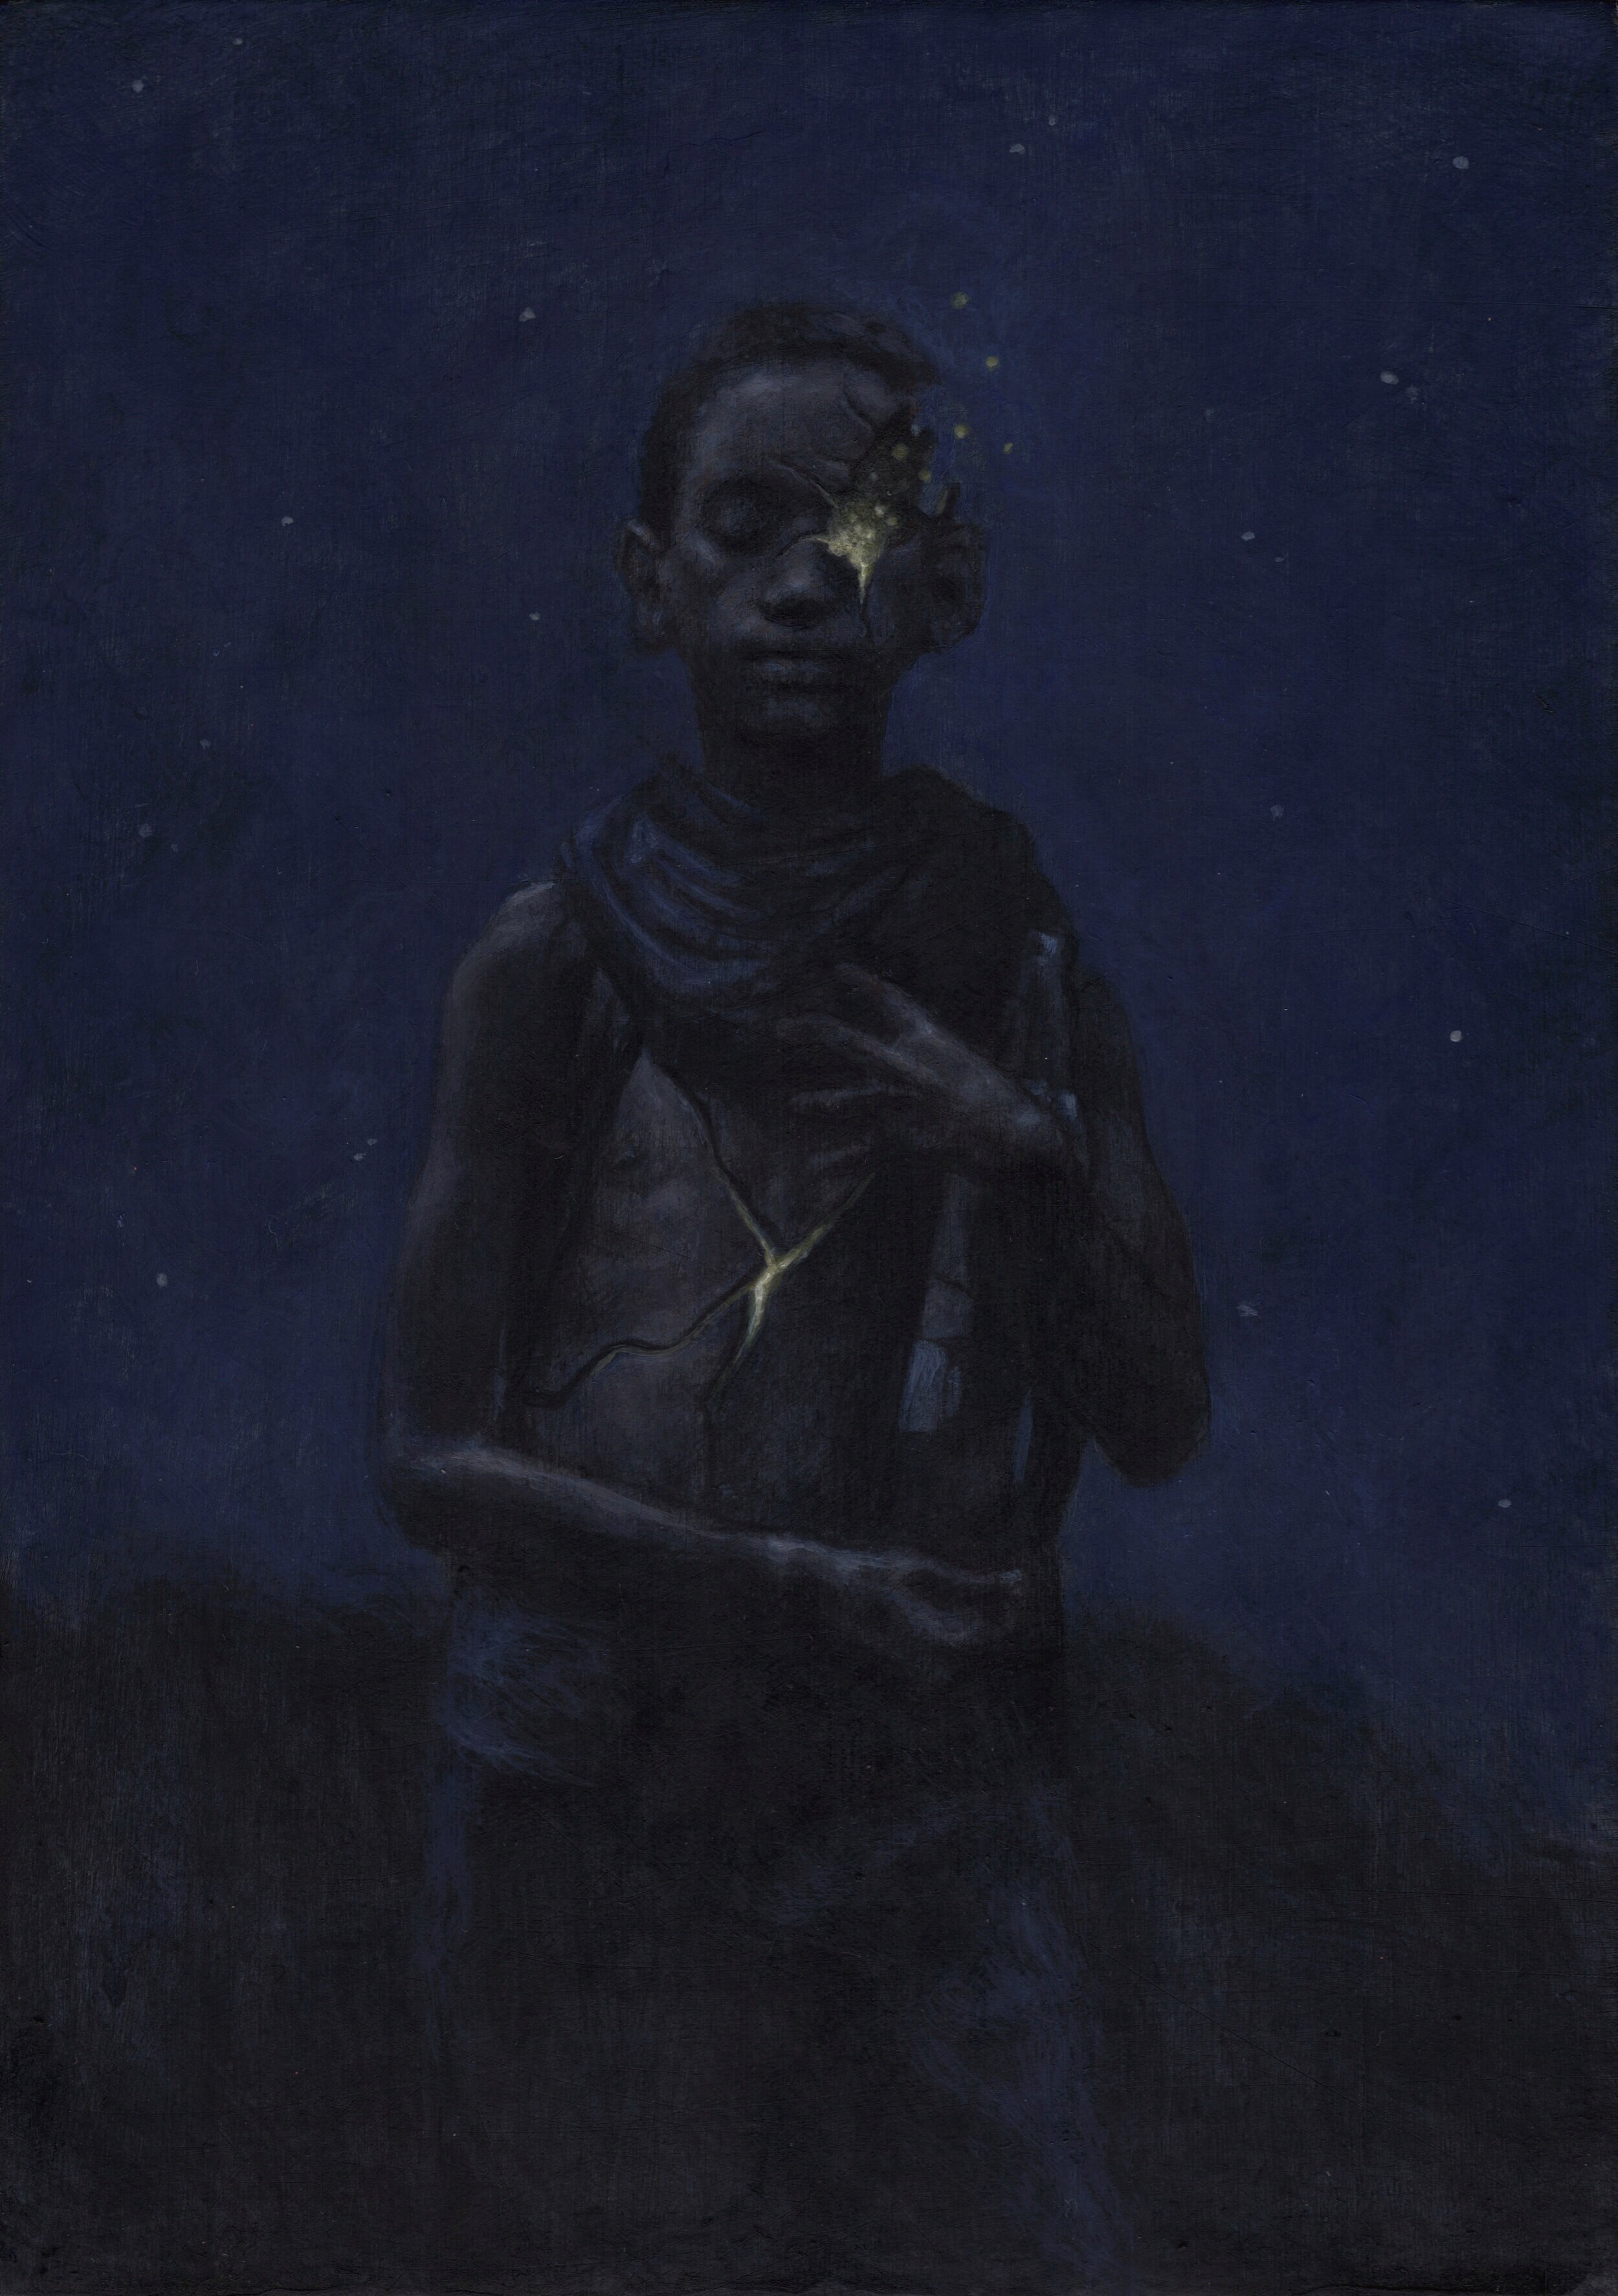    Martyr  , 5 x 7 inches, acrylic on panel, 2019   